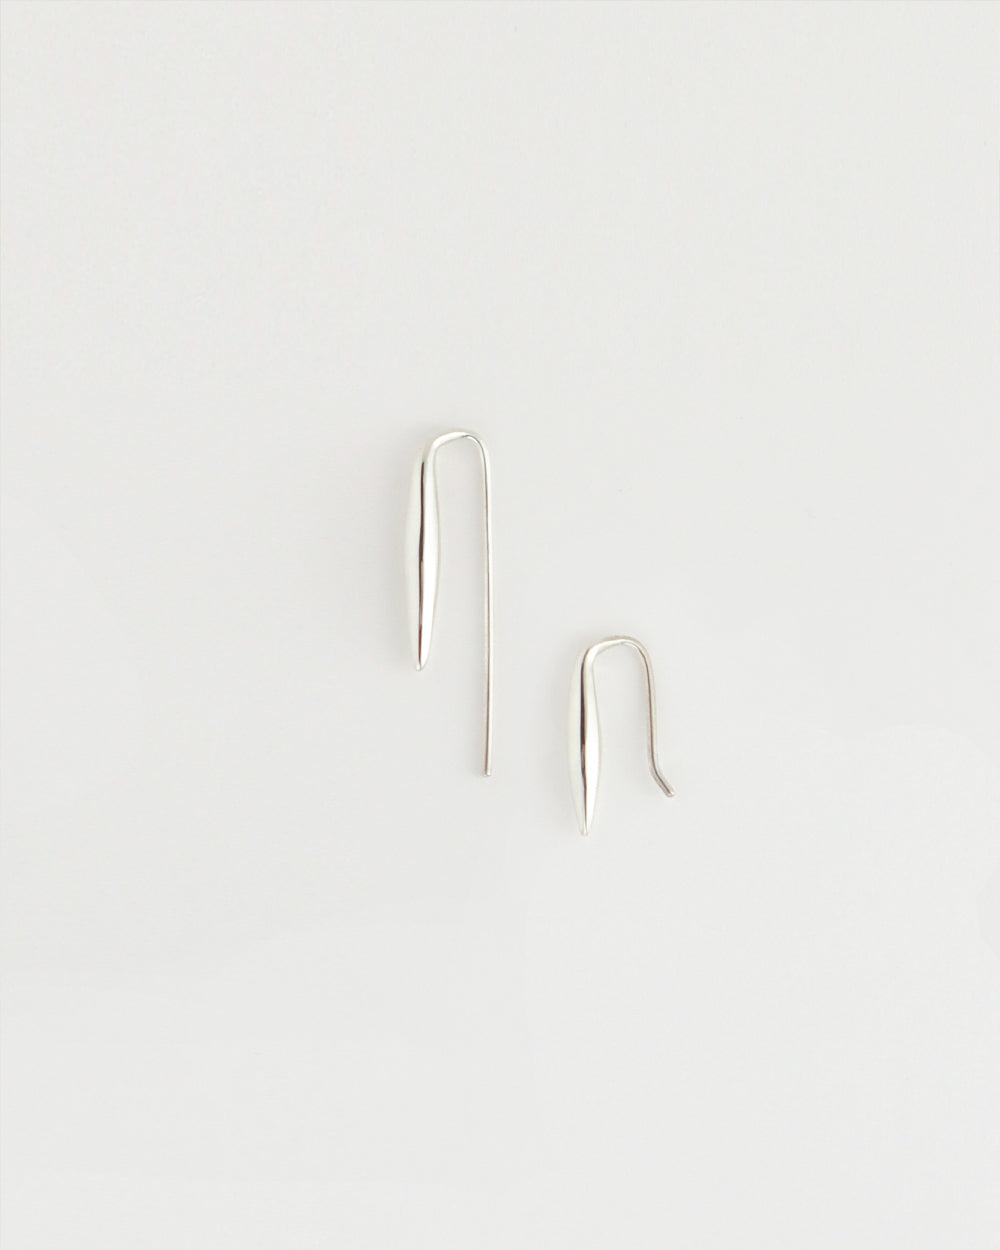 SEED PIERCE-Small & Large (Paired)